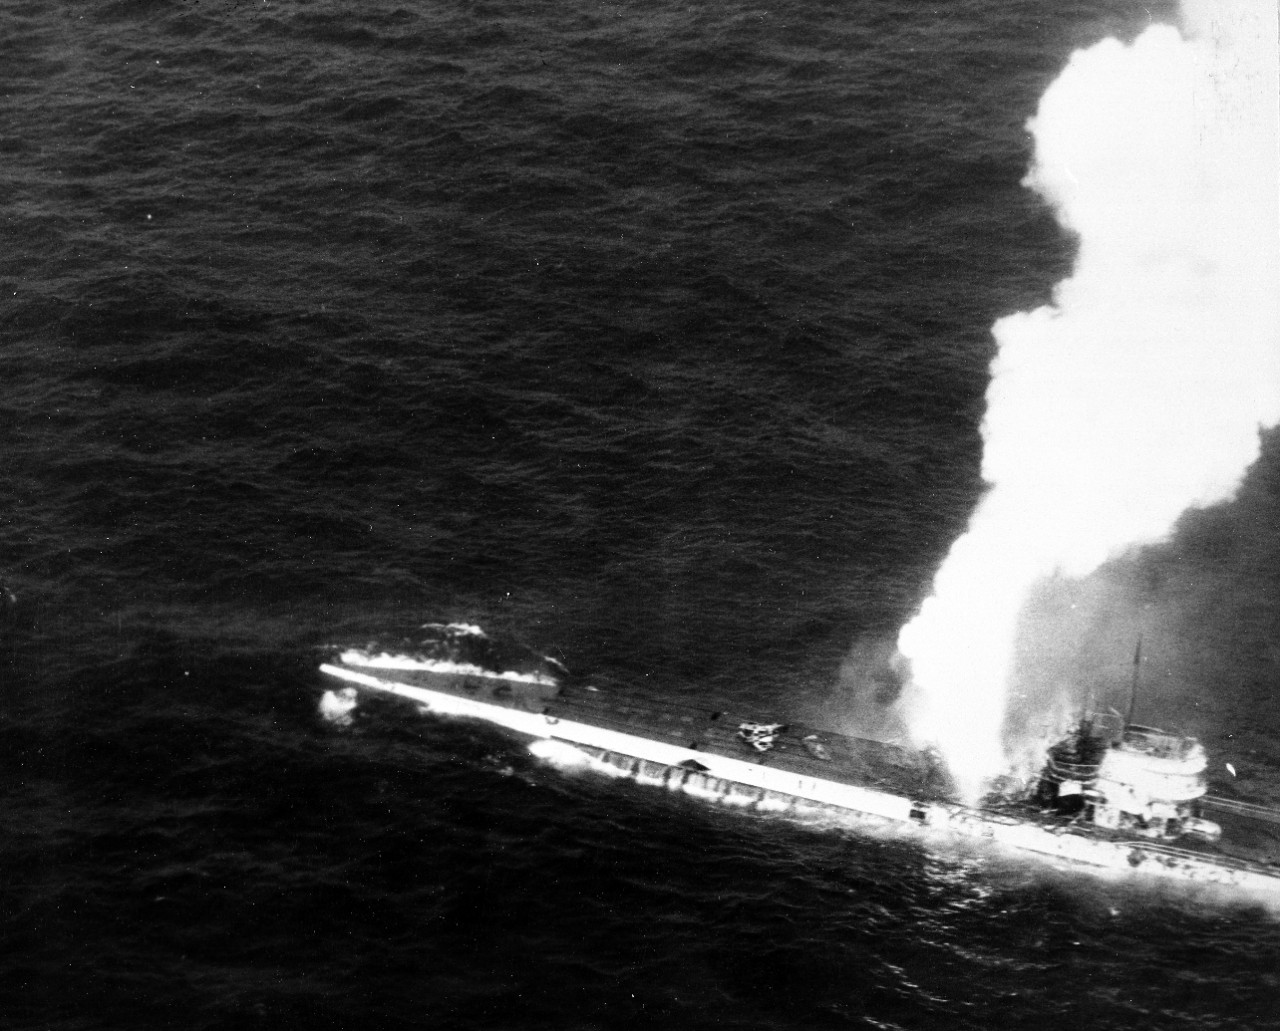 A plane flying from Guadalcanal snaps a picture of U-515 as the submarine burns and sinks, 9 April 1944. The explosion appears to be erupting from the boat’s aft antiaircraft gun battery. (U.S. Navy Photograph 80-G-227197, National Archives and Records Administration, Still Pictures Division, College Park, Md.)